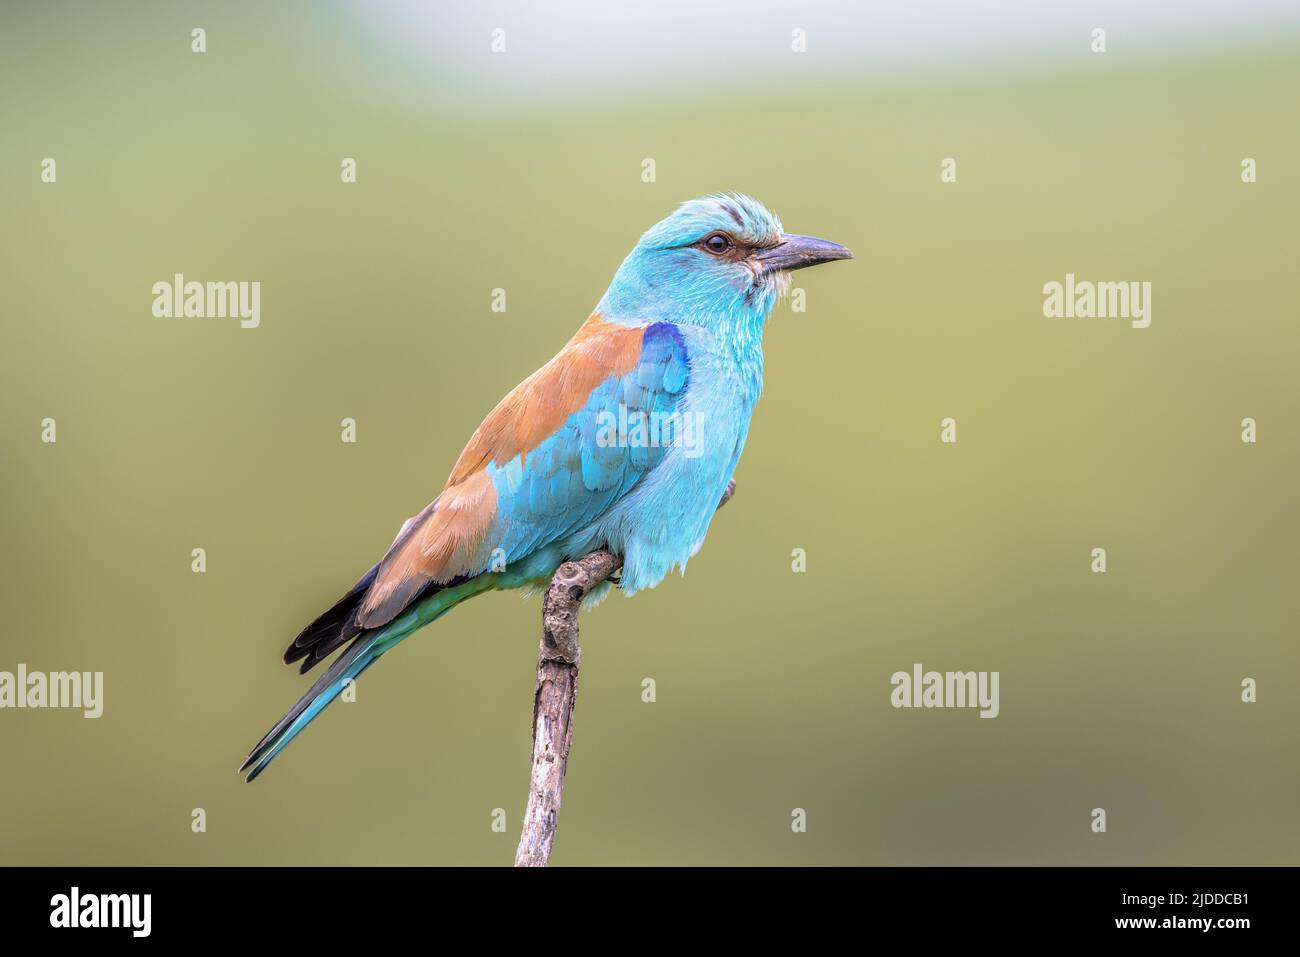 European roller (Coracias garrulus) perched on branch. This Migratory Bird Breeds in Southern Europe. Bulgaria. Wildlife Scene of Nature in Europe. Stock Photo